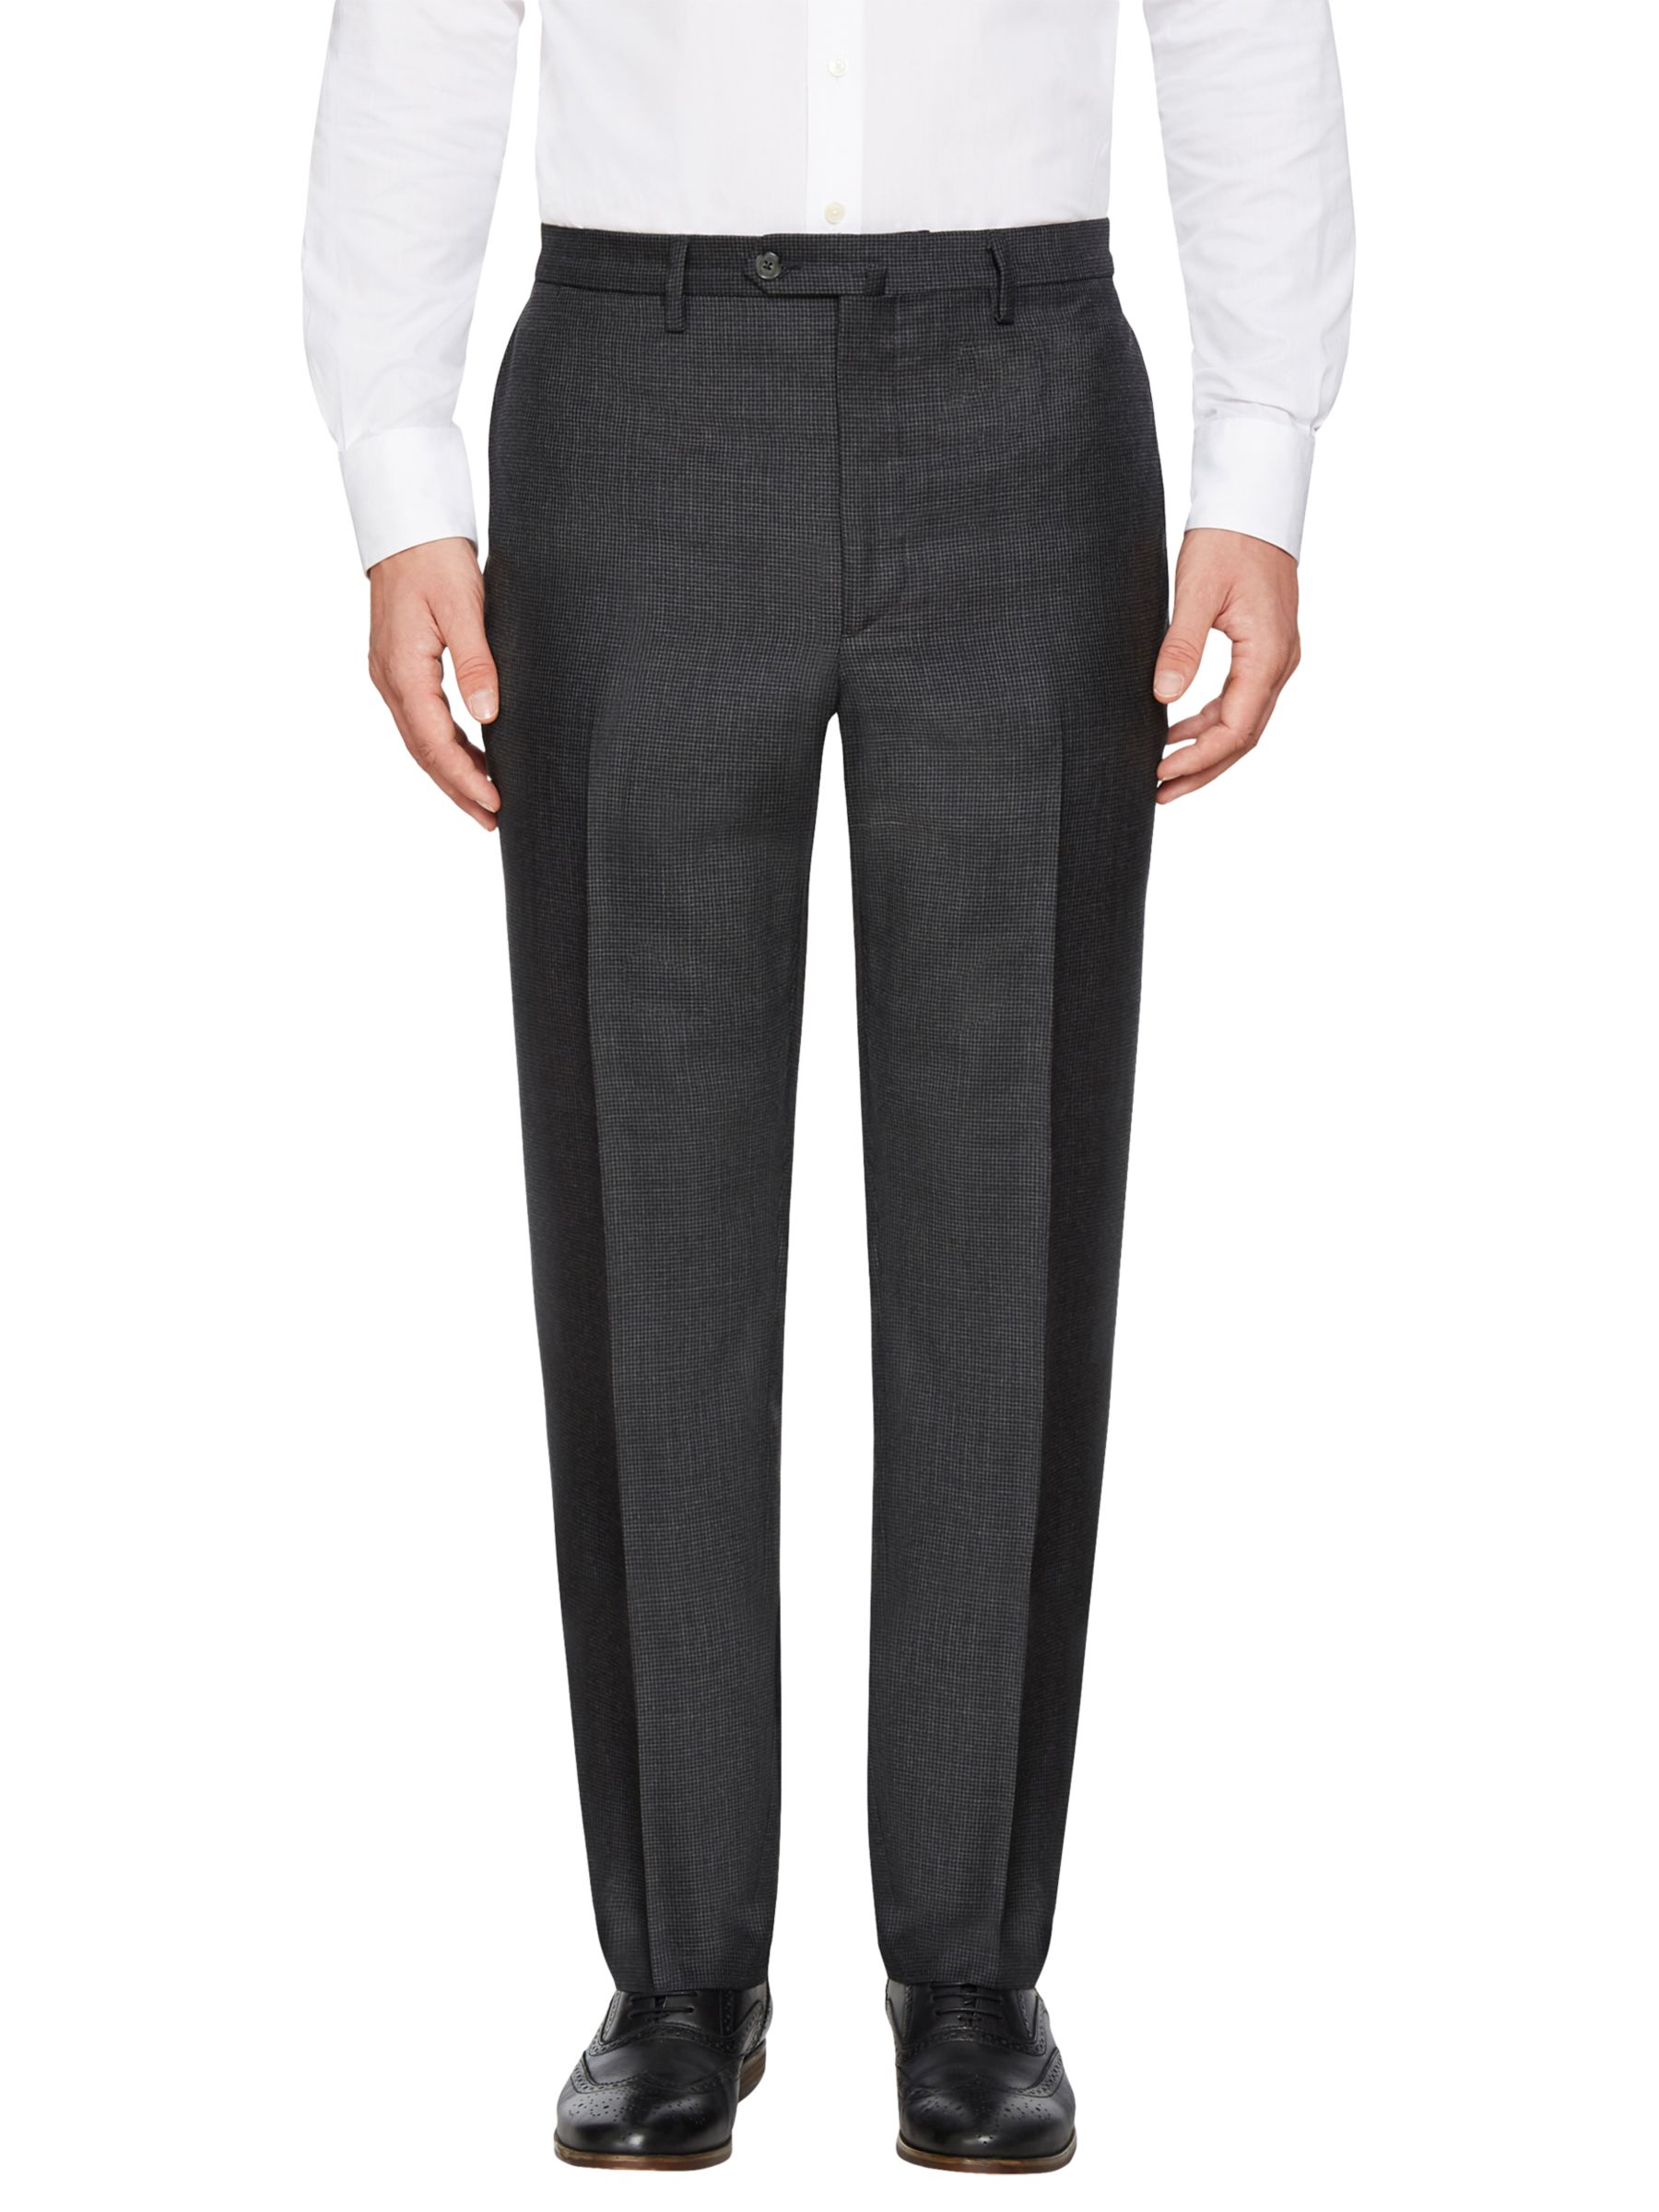 Hackett London Wool Puppytooth Regular Fit Suit Trousers, Charcoal, 34L